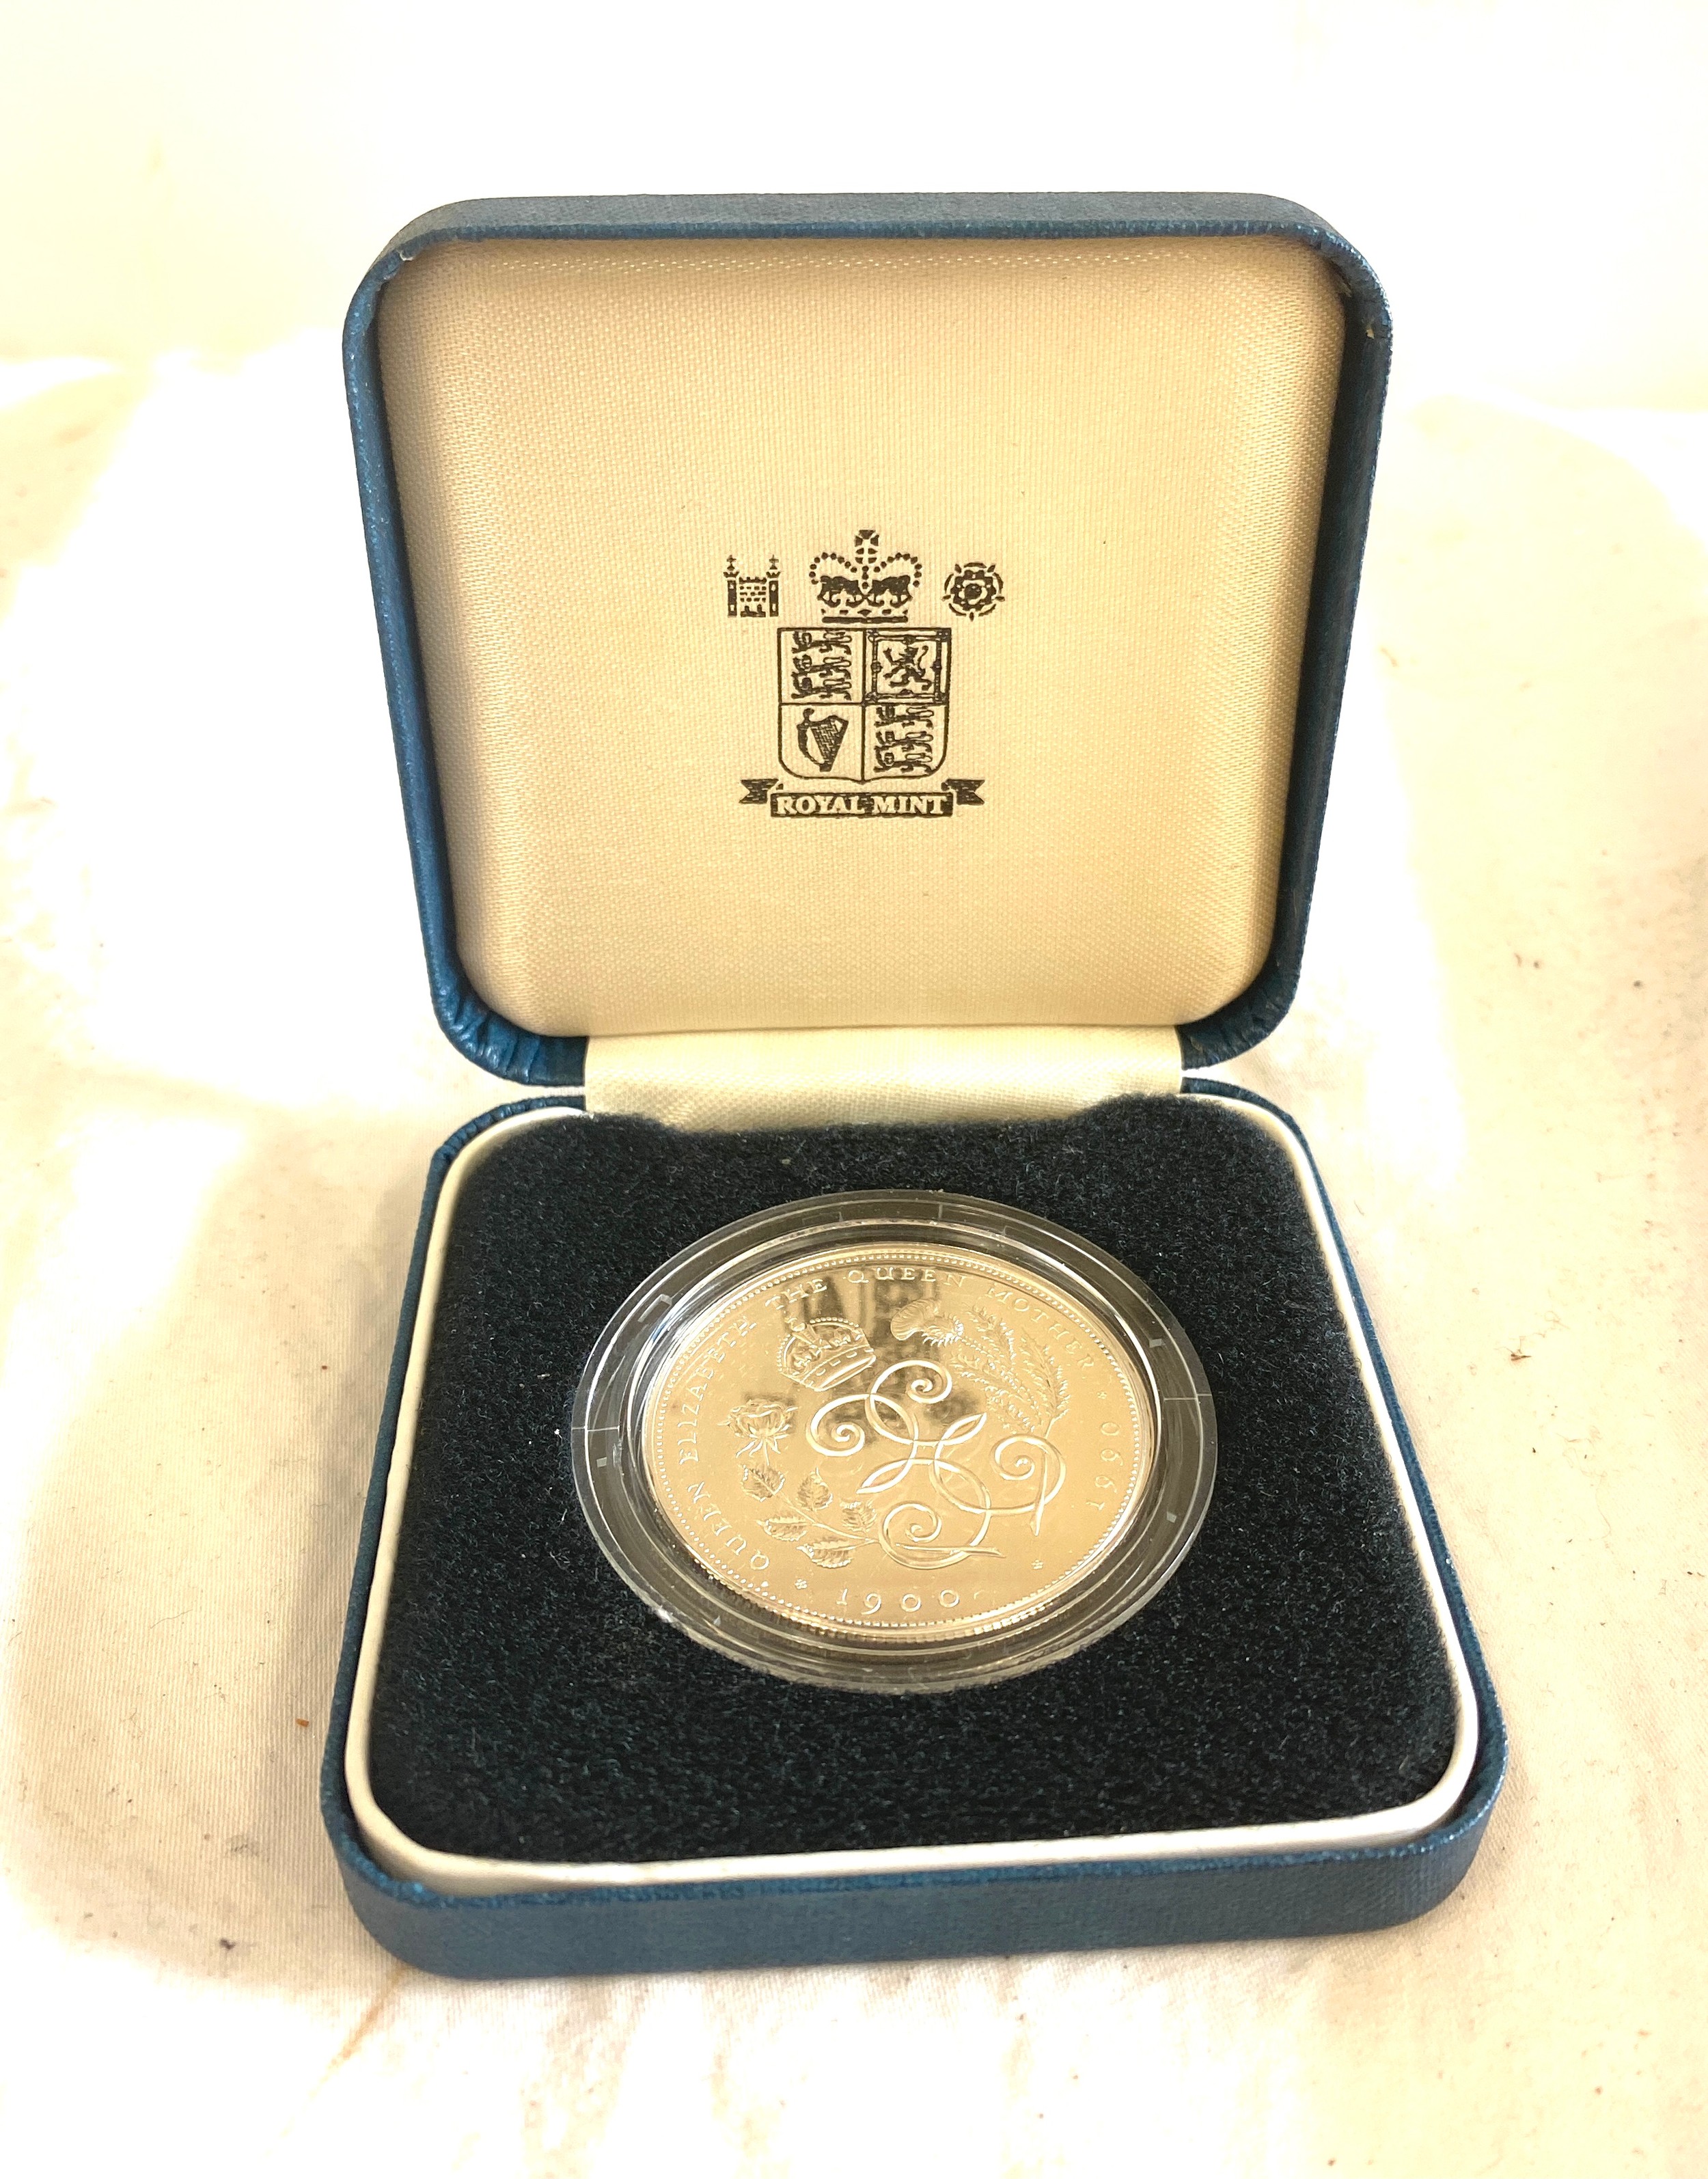 Royal mint the Queen Mother commemorative coin